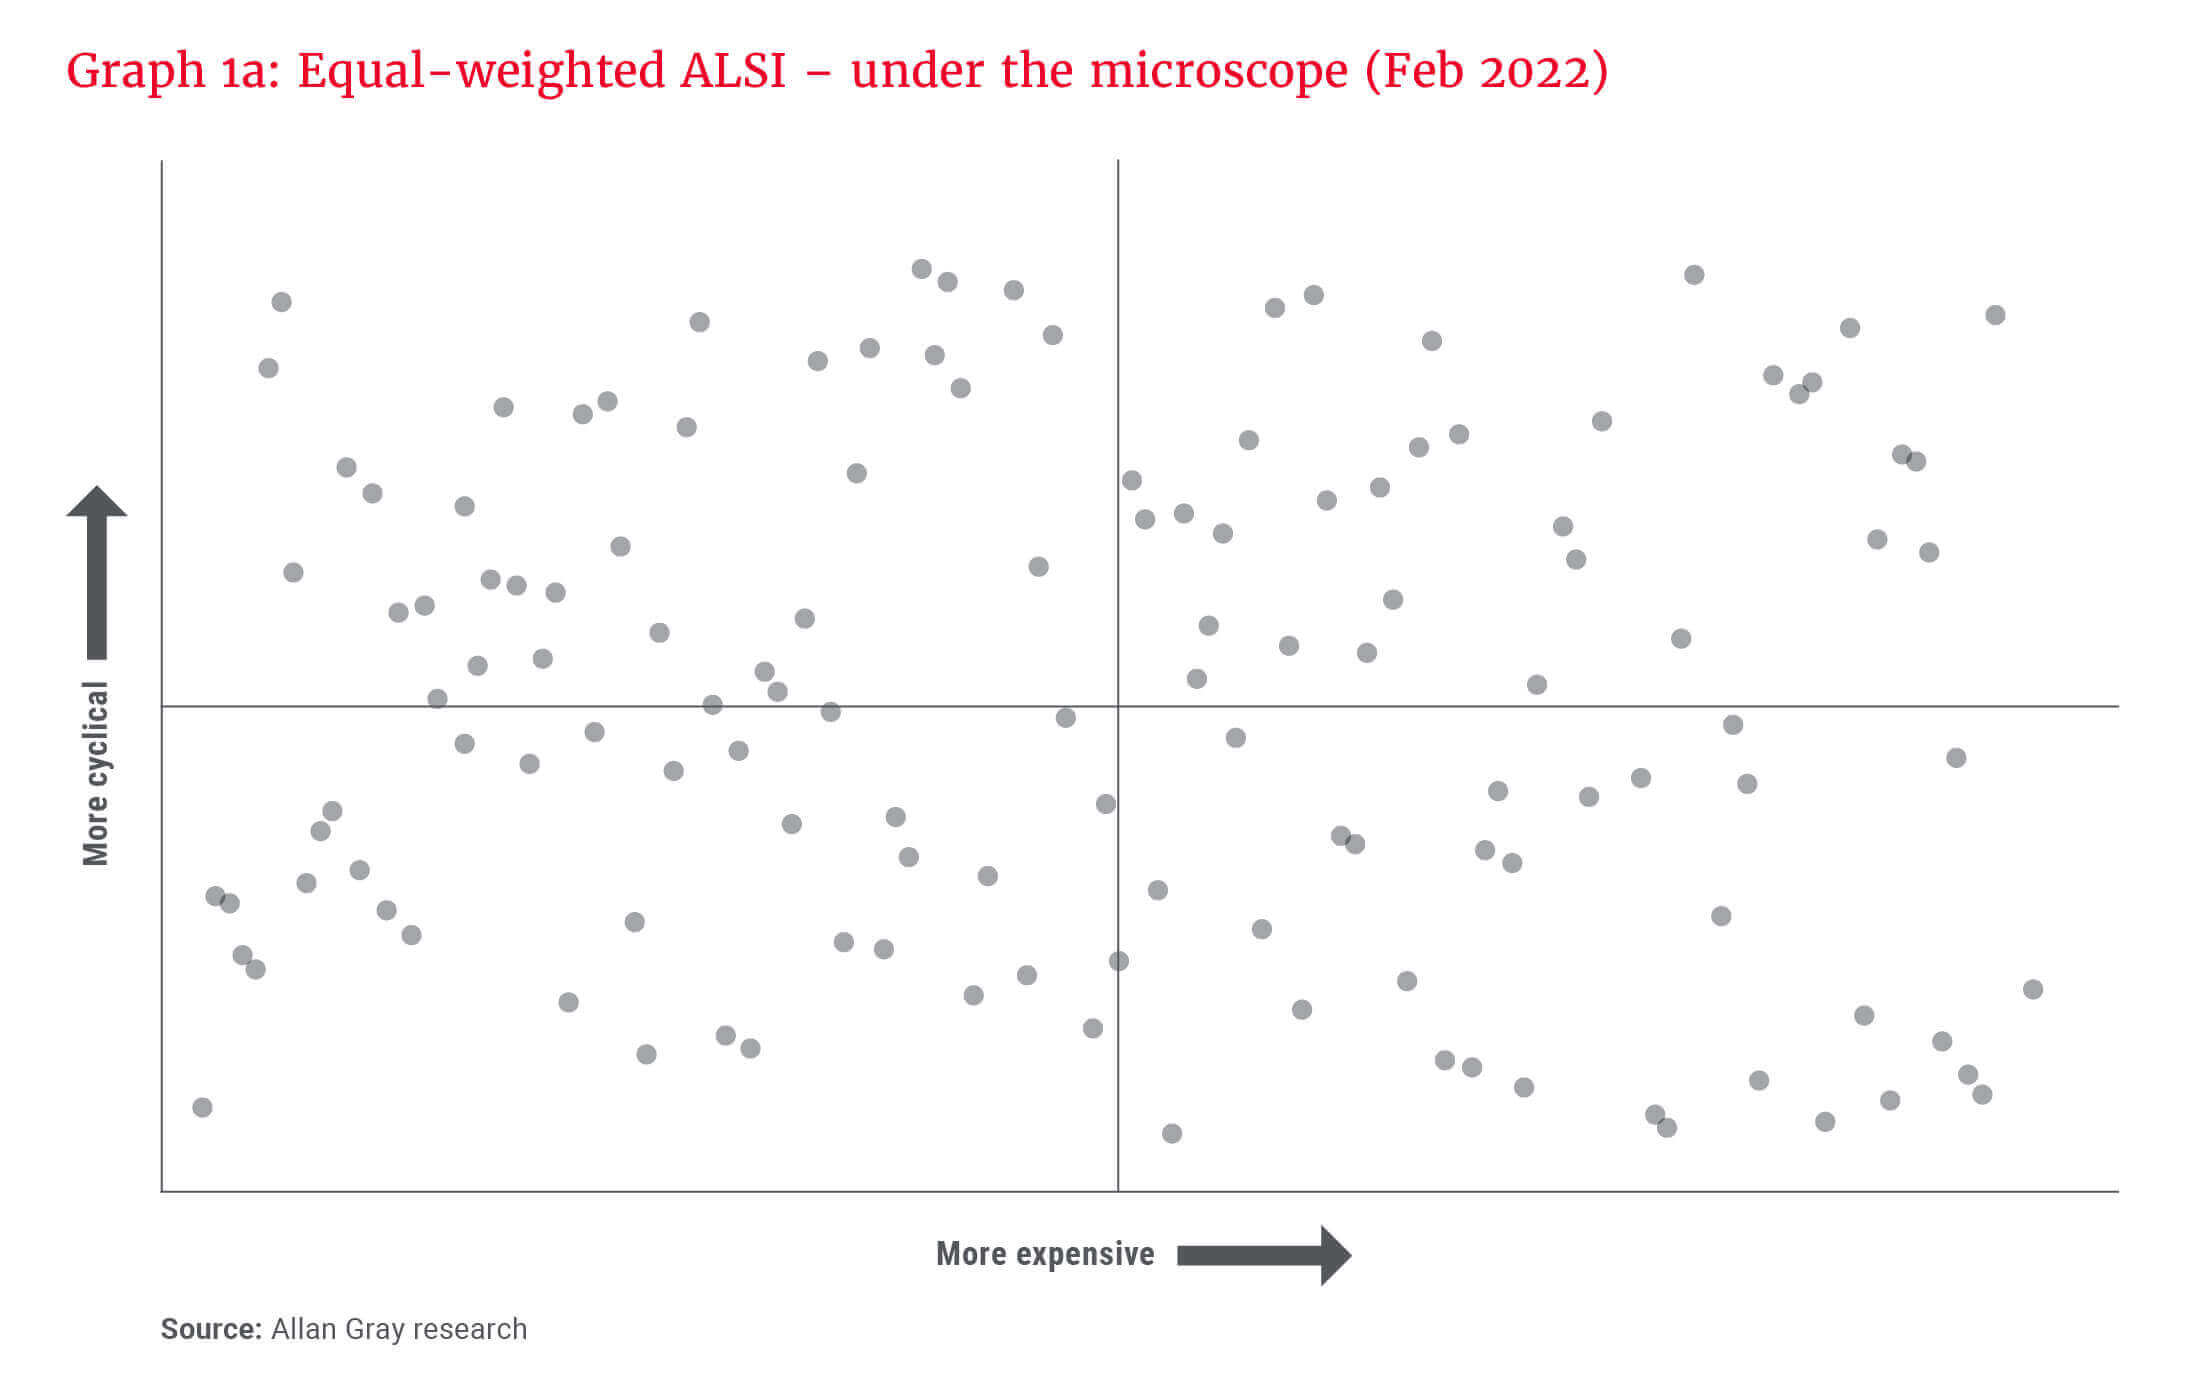 Graph 1a_Equal-weighted ALSI - under the microscope (Feb 2022).jpg